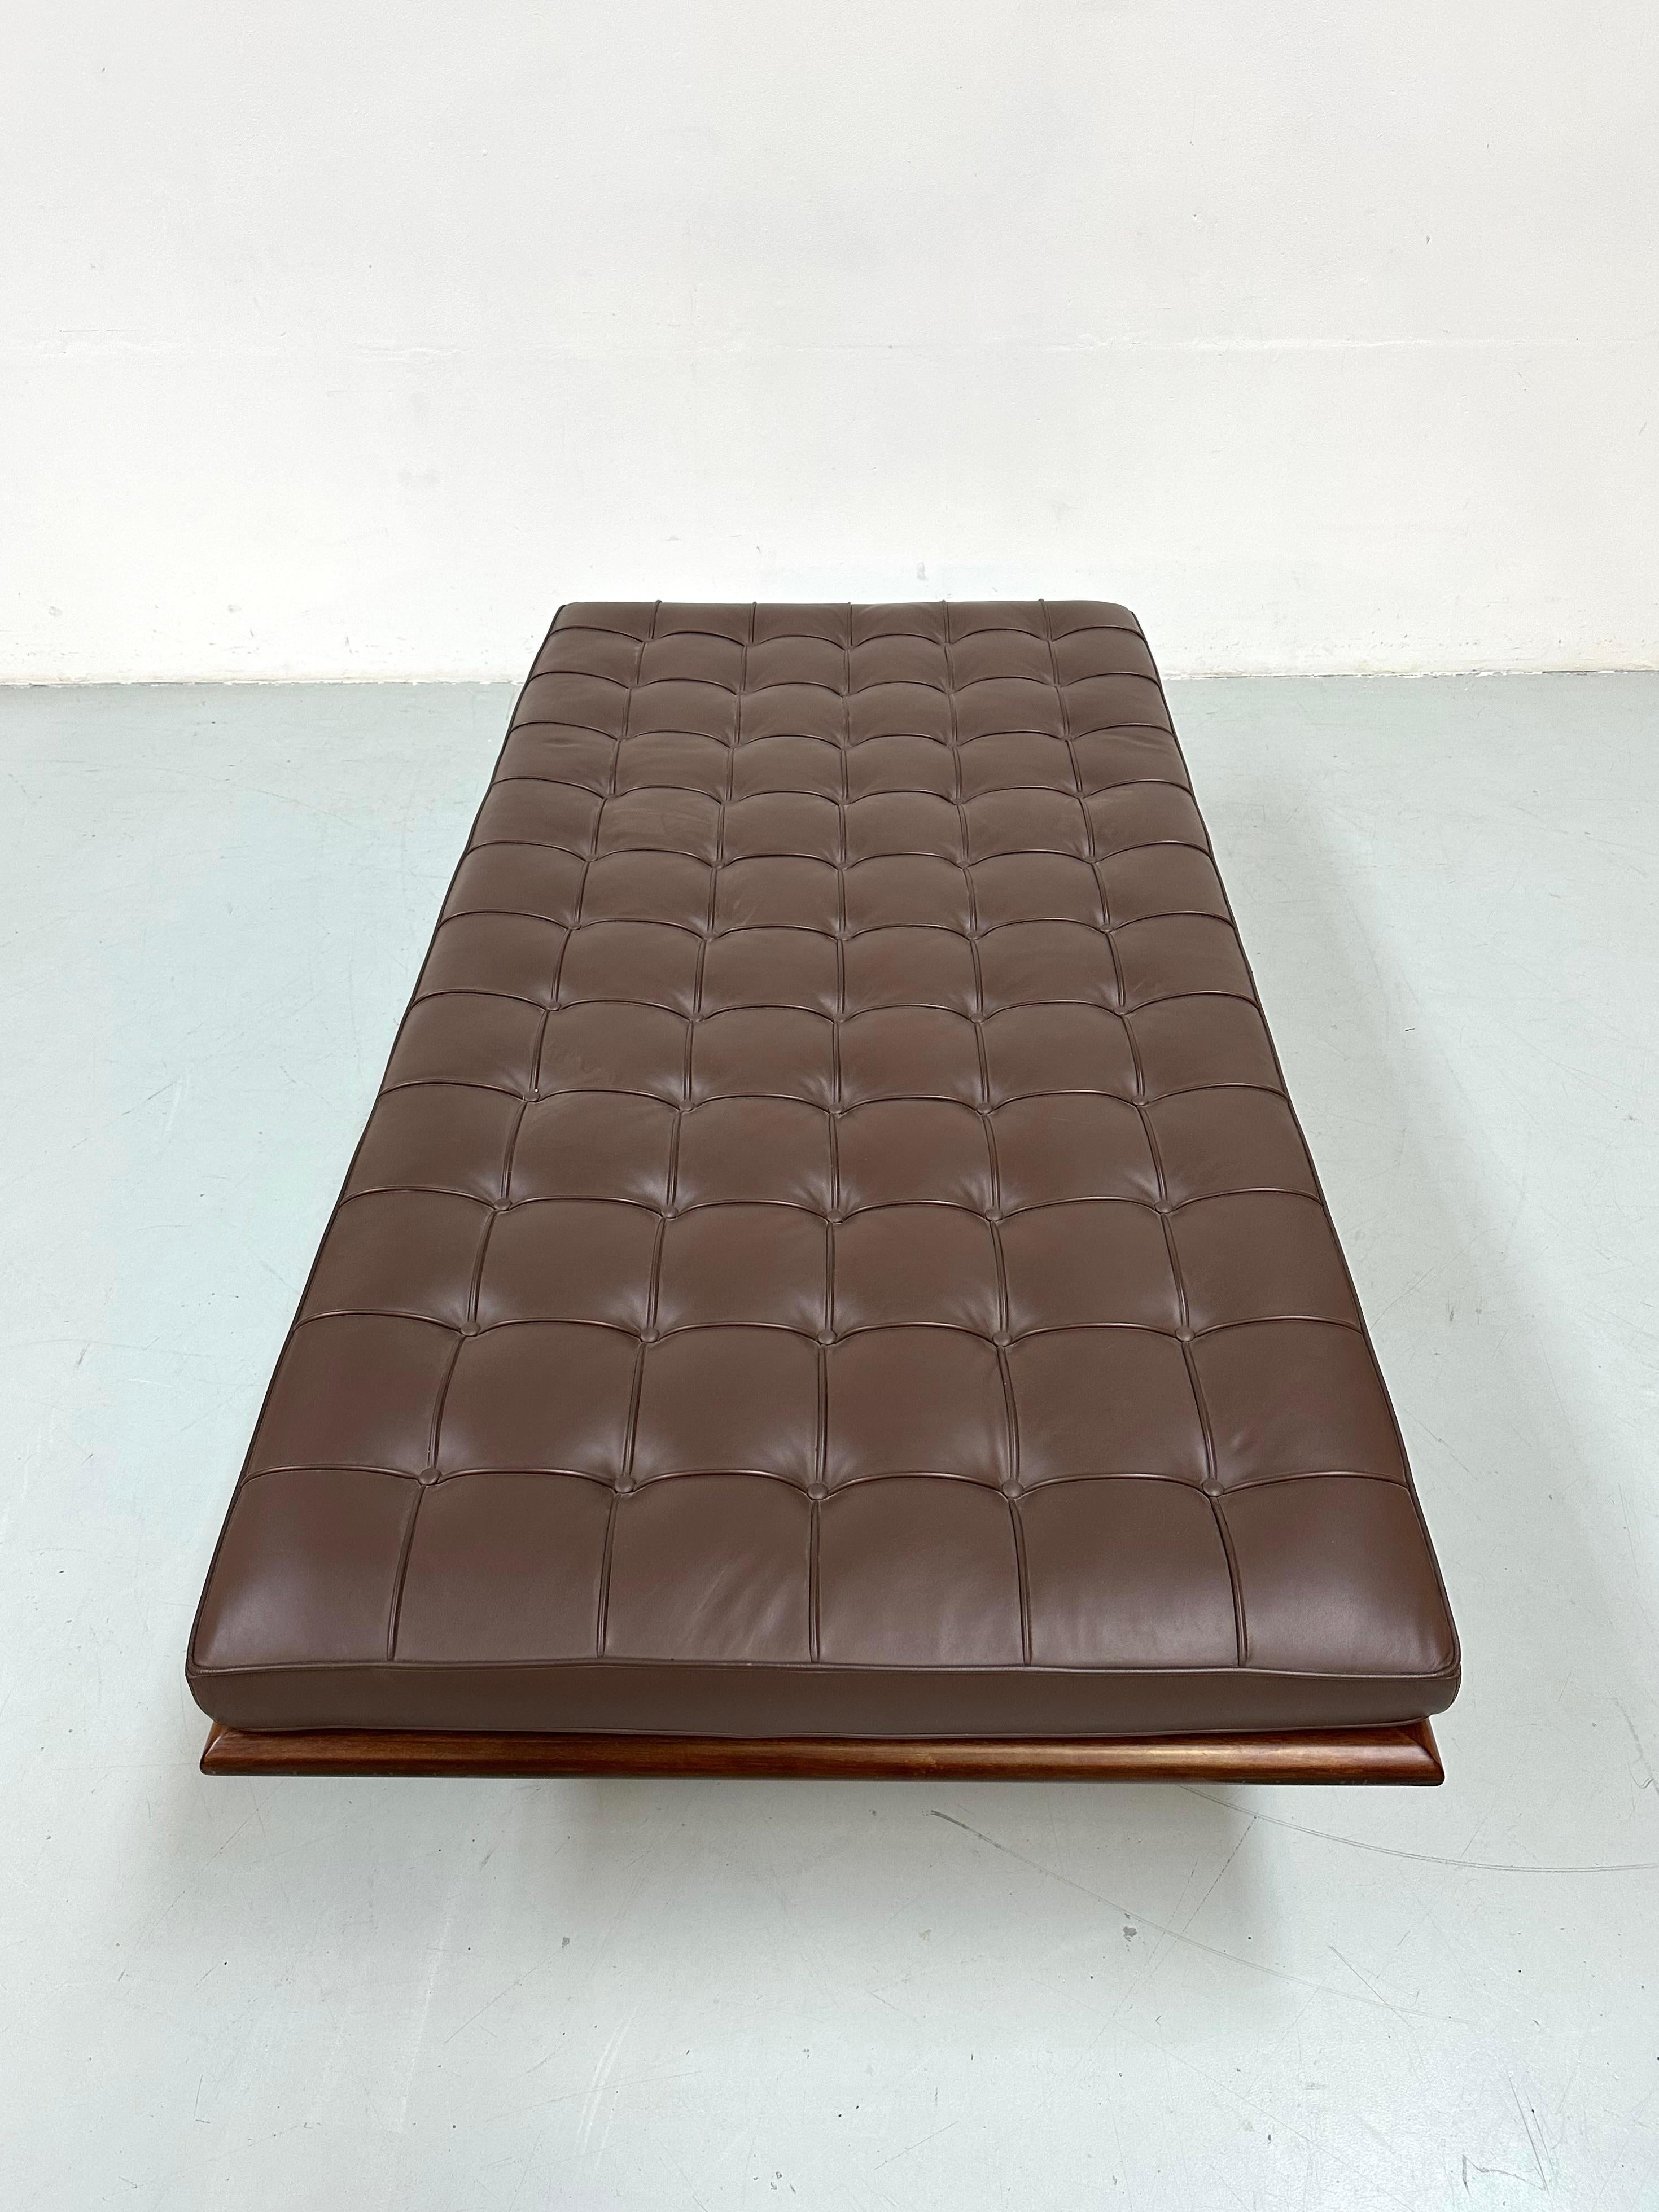 Barcelona Daybed in Brown Leather by Ludwig Mies van der Rohe for Knoll, 1980s. For Sale 10